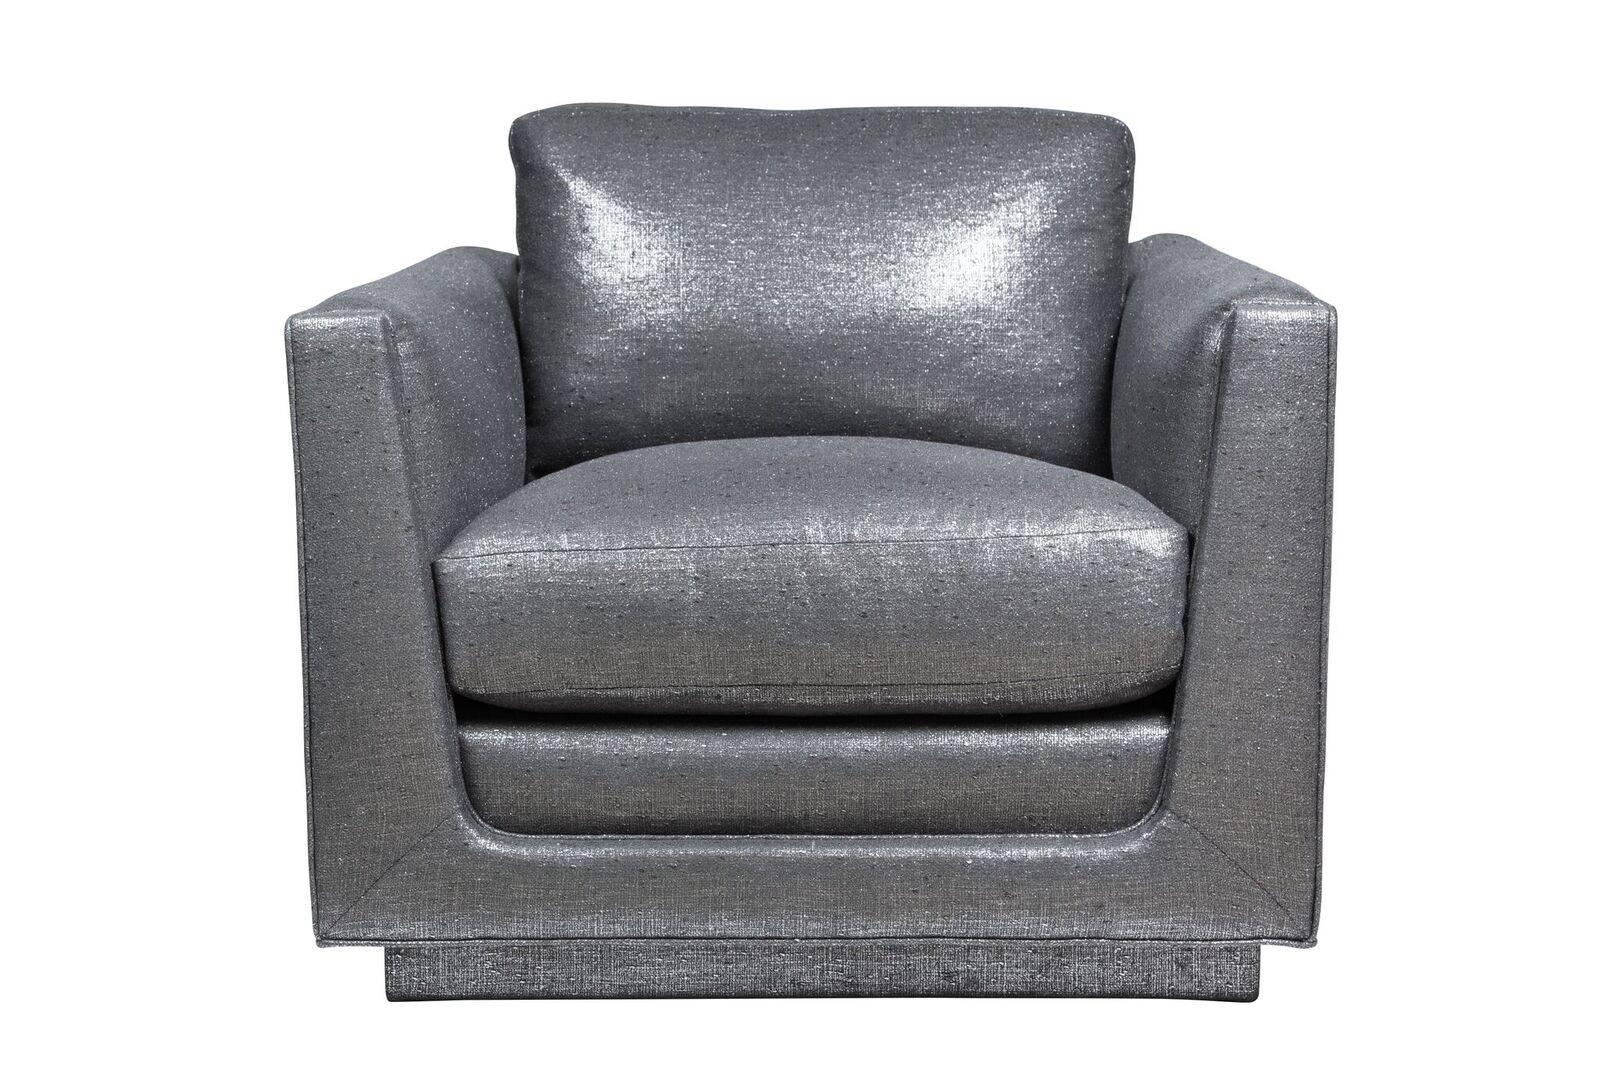 Incredibly chic pair of club chairs designed by Arthur Elrod for the Cody House in Palm Springs, circa 1960s. Re-imagined in a glamorous metallic grey linen.
A sofa that is part of the suite is listed separately.  
